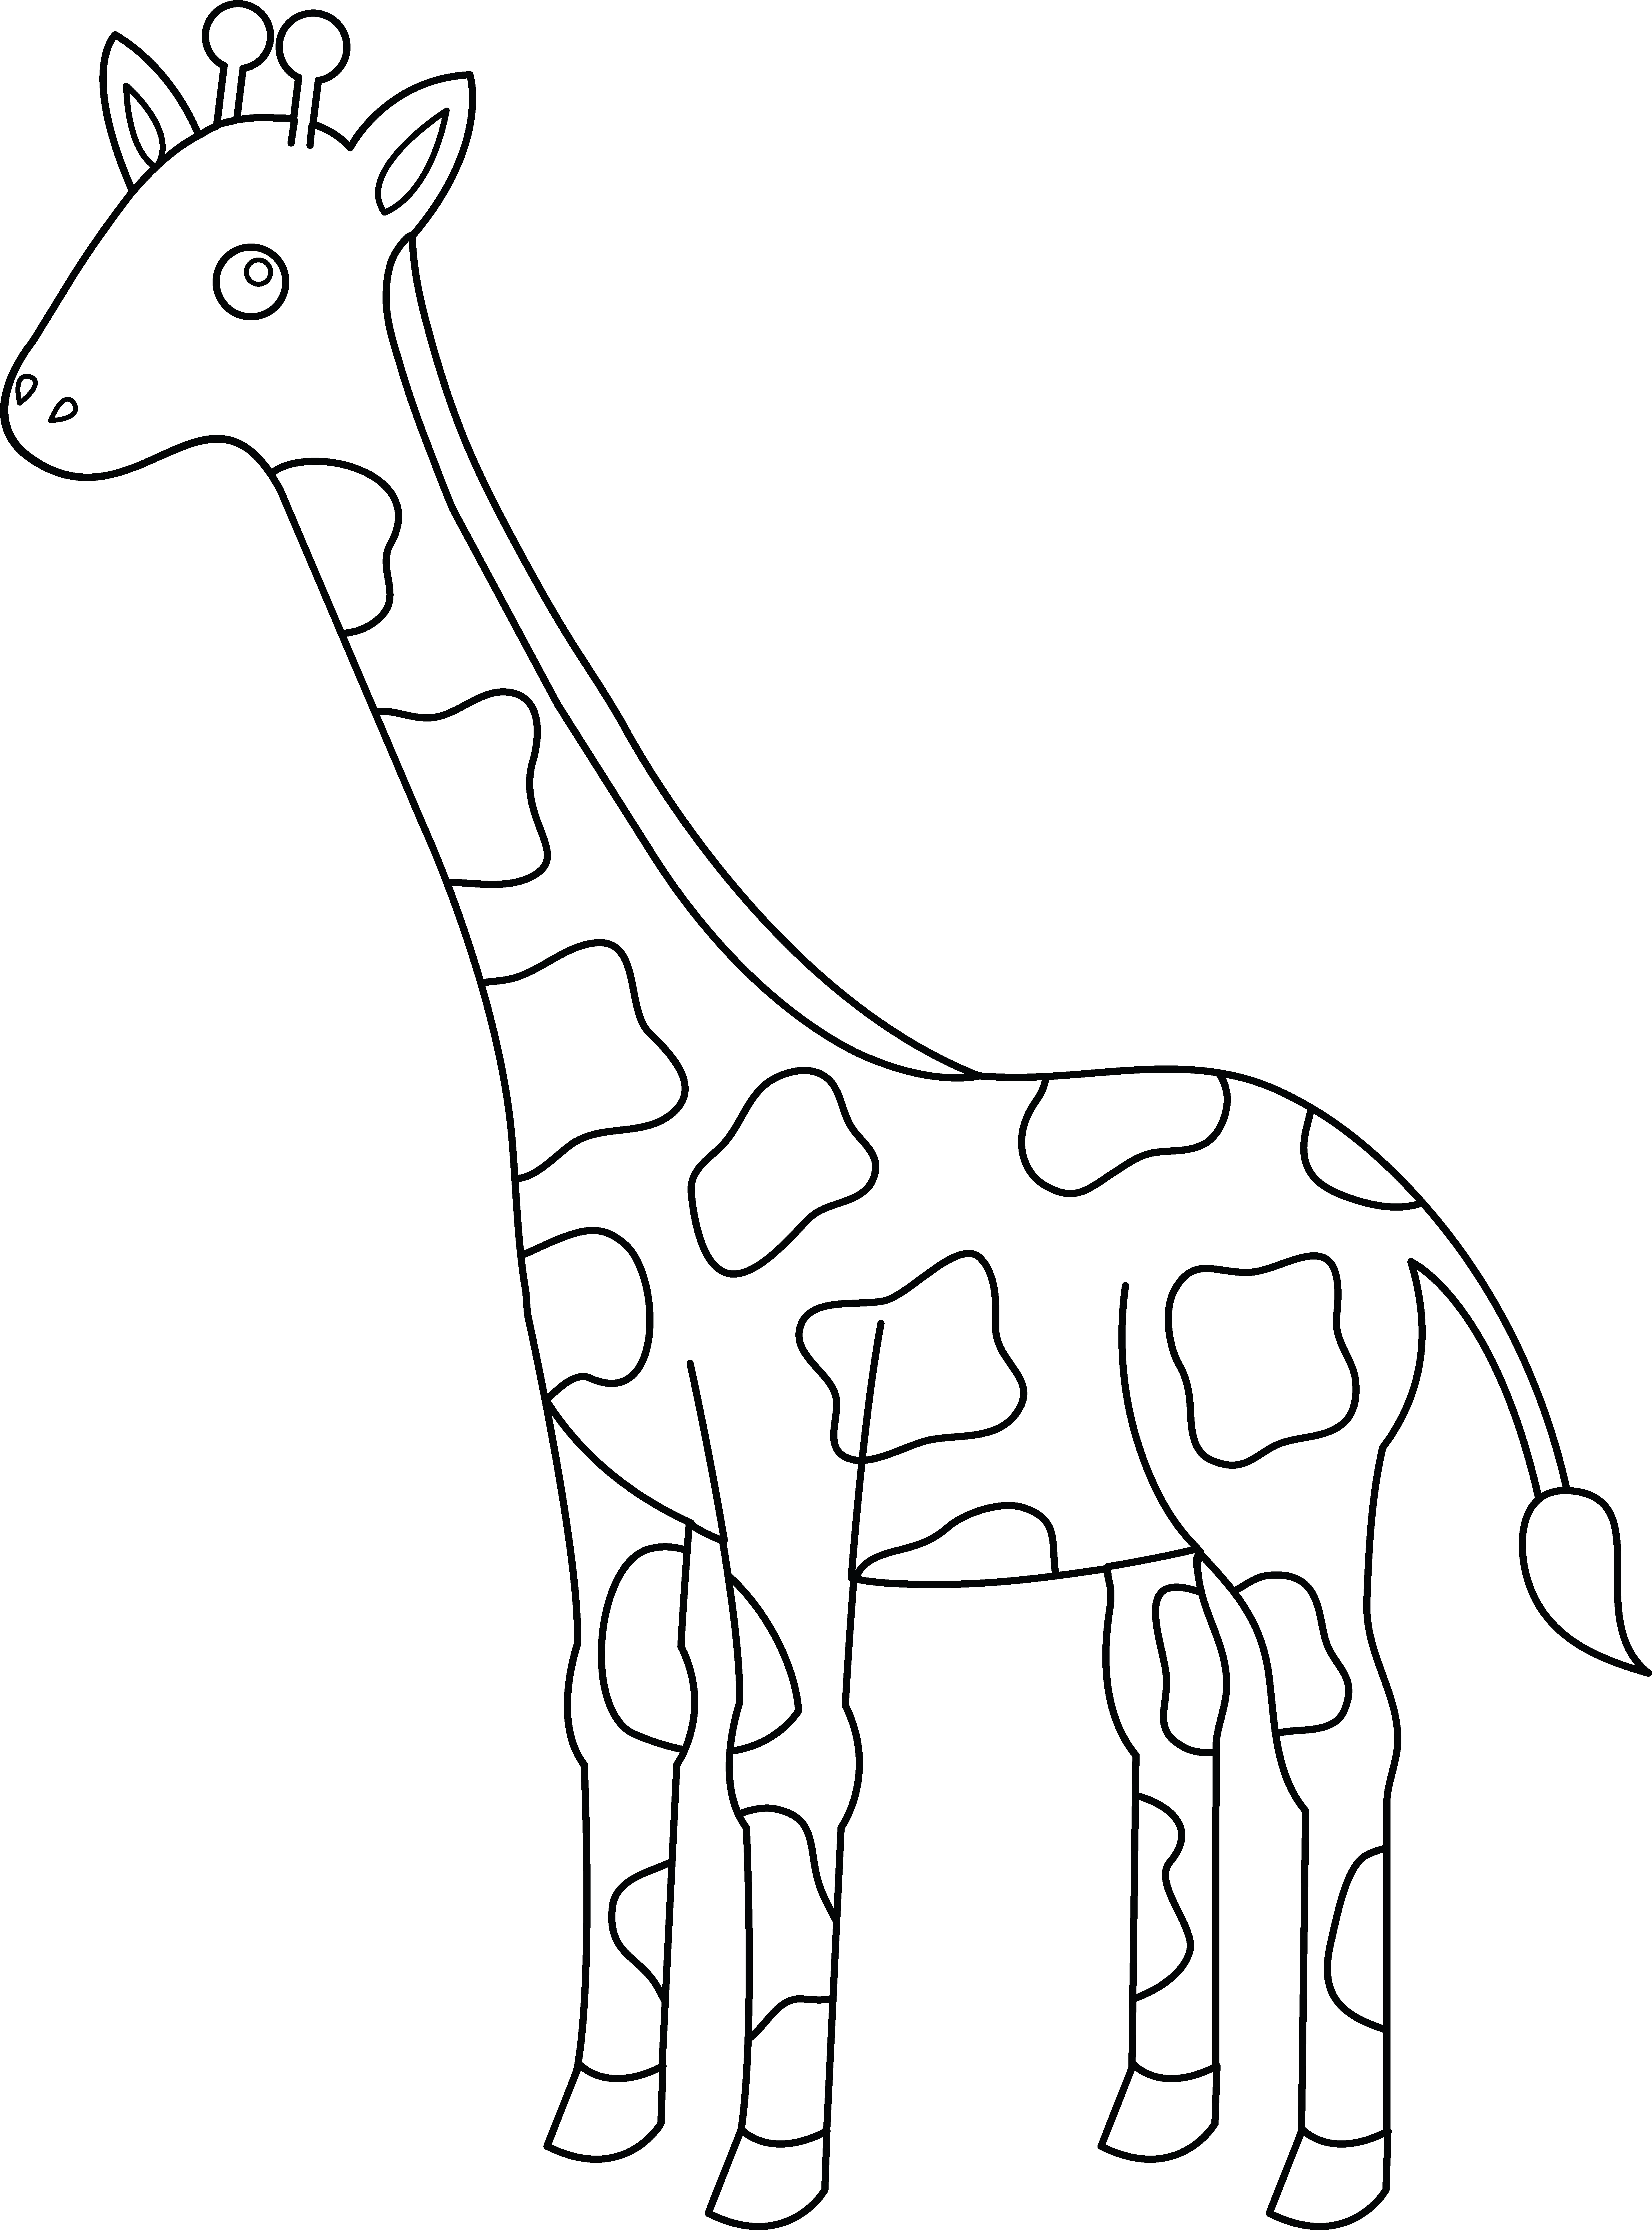 giraffe-cartoon-coloring-pages ...